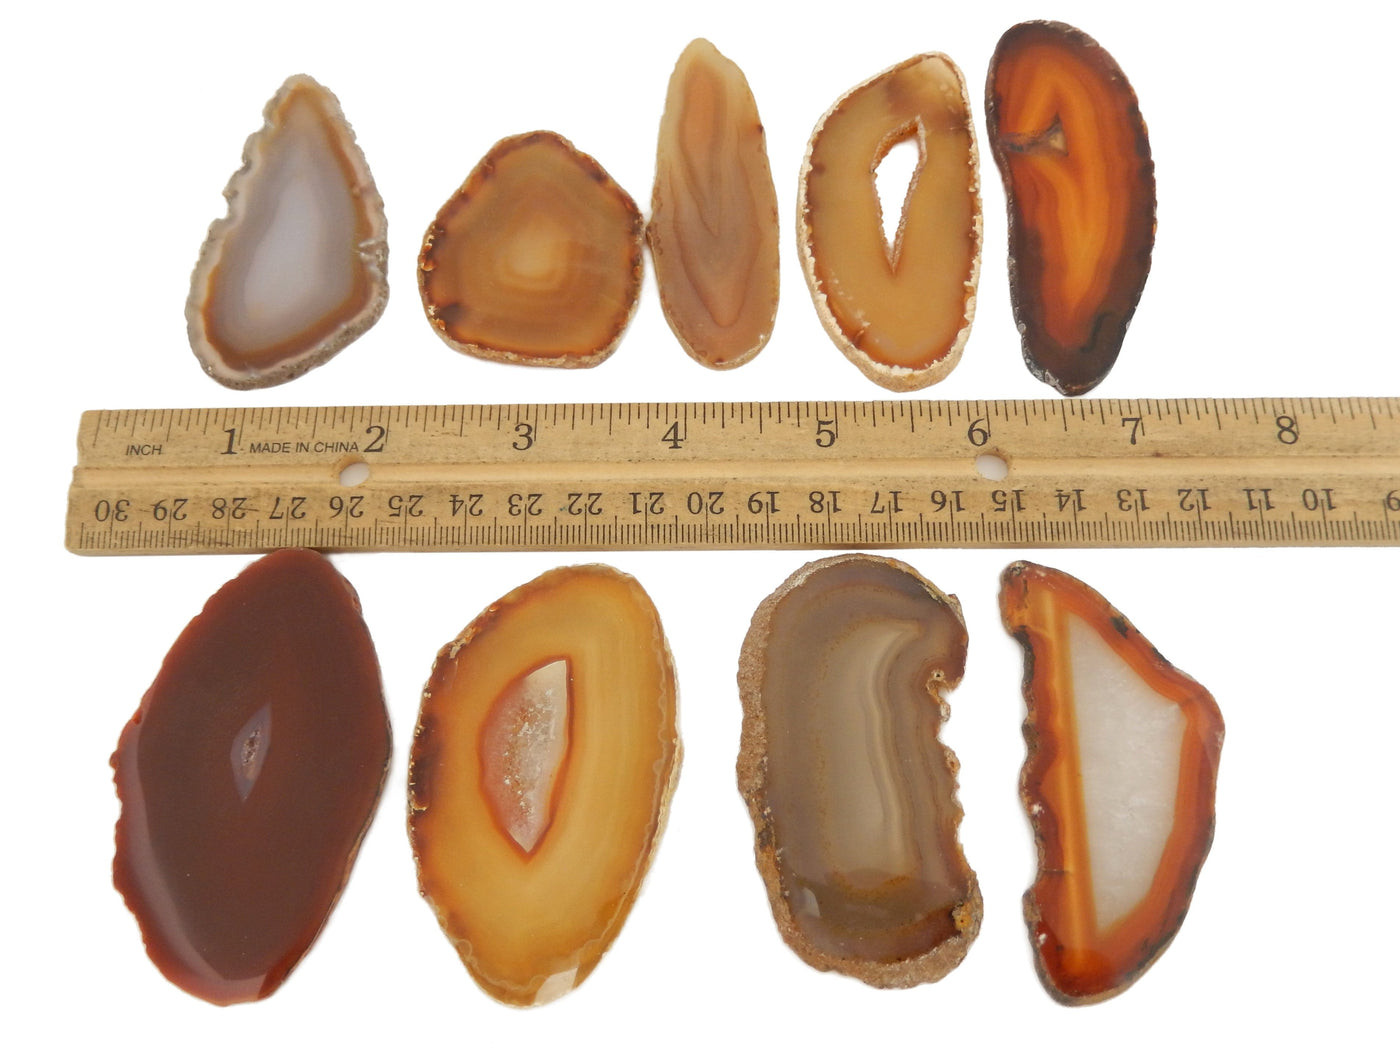 8 Red Agate Slices next to ruler for size comparison on white background